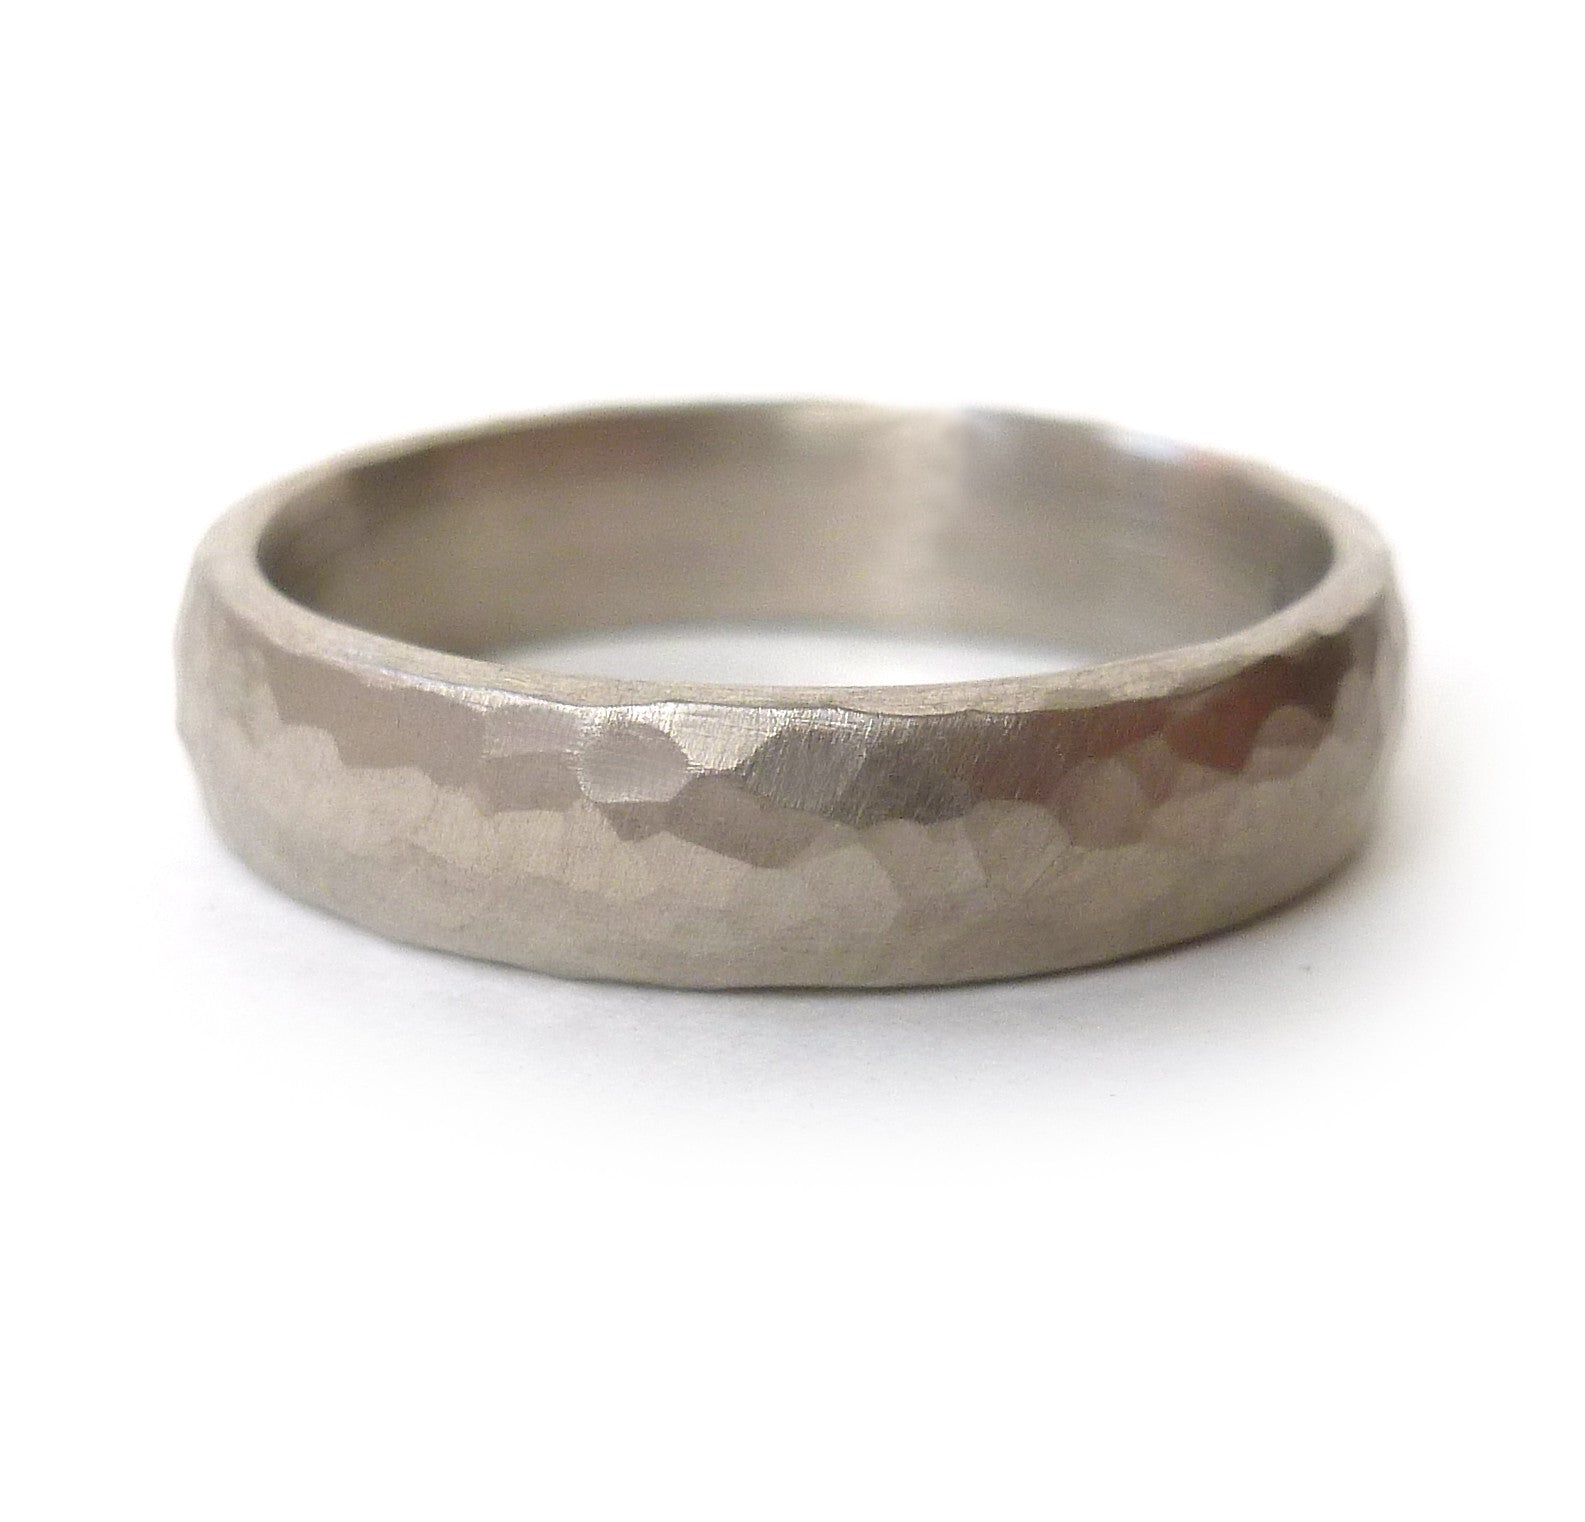 White gold hammered ring (gpr02) - Sue Lane Contemporary Jewellery - 1